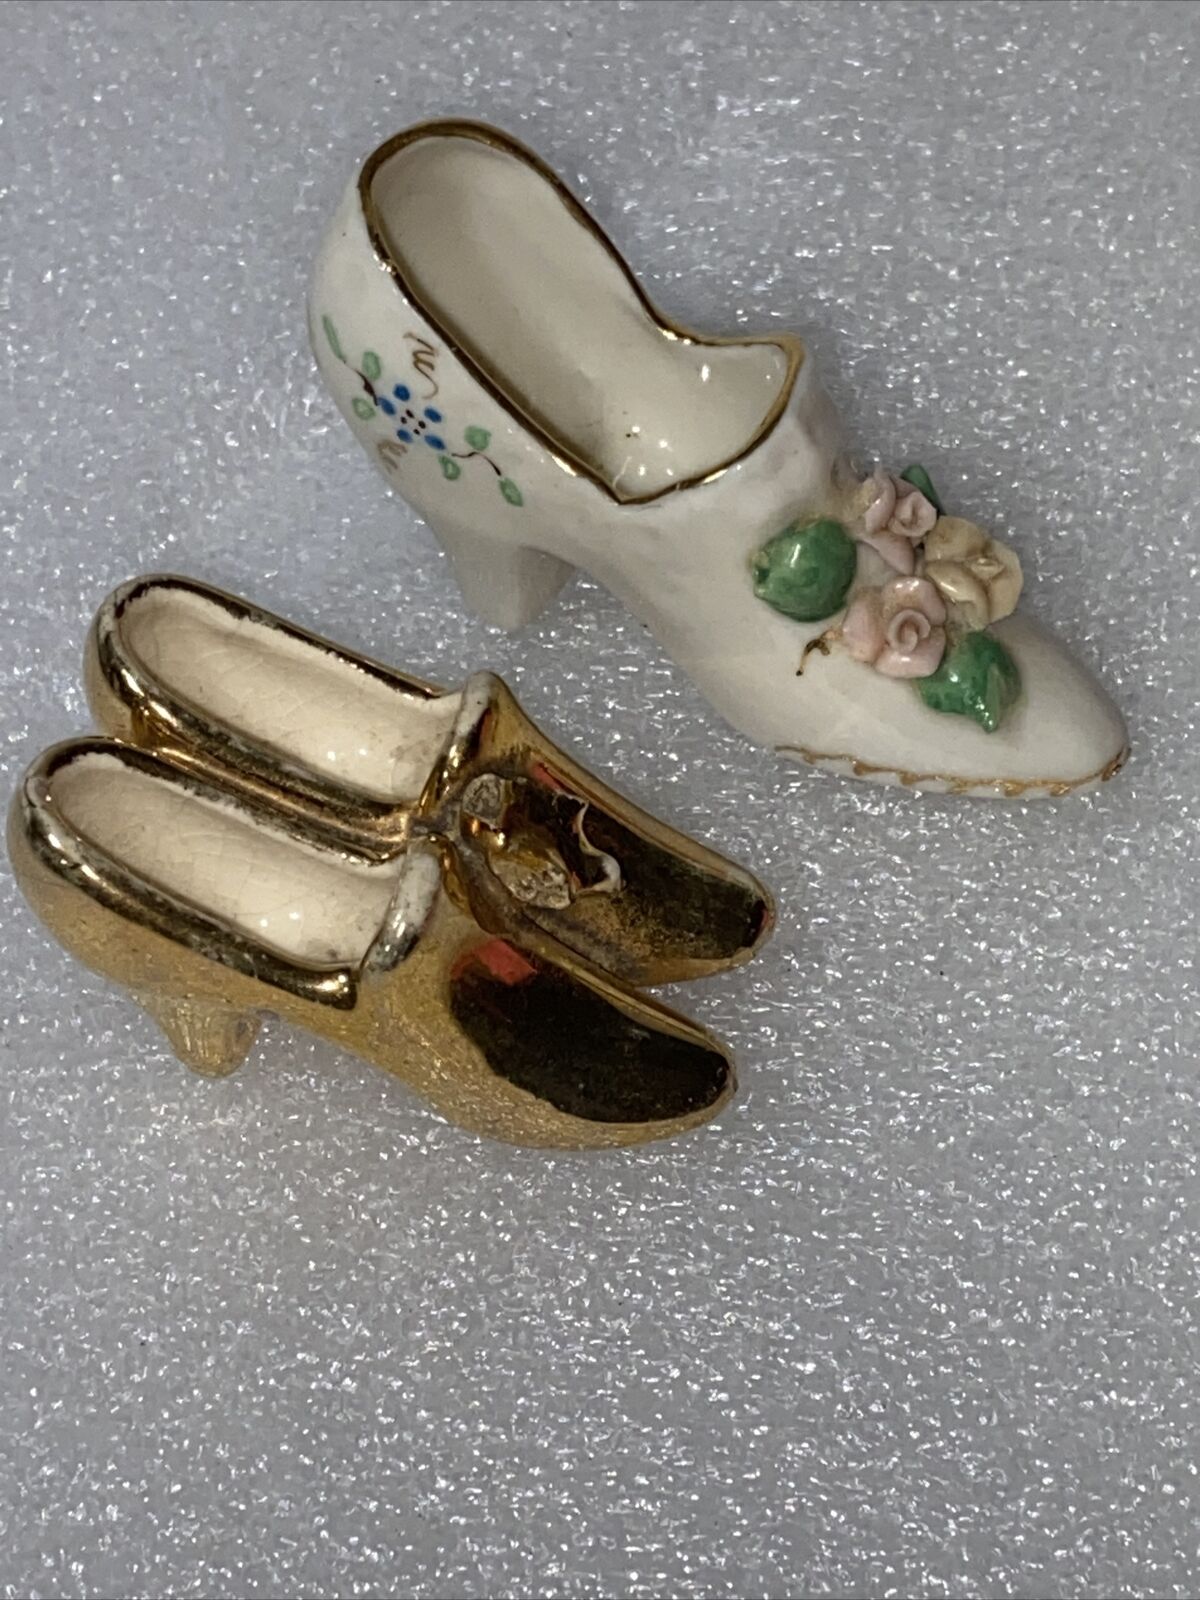 Vintage Victorian Style Miniature Gold Shoes And Rose Flower Shoe With Gold Tone